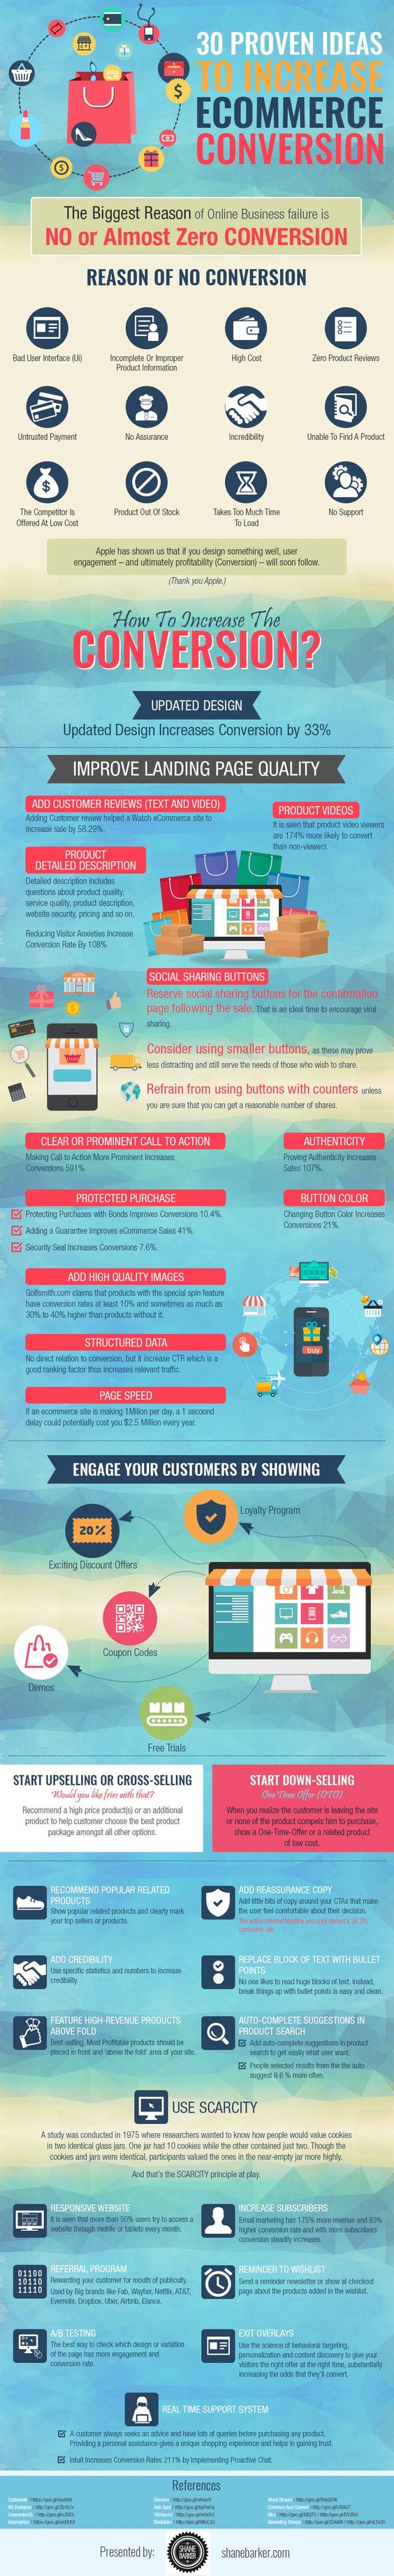 Infographic Of The Week: Proven Ways To Increase Ecommerce Conversion Rates